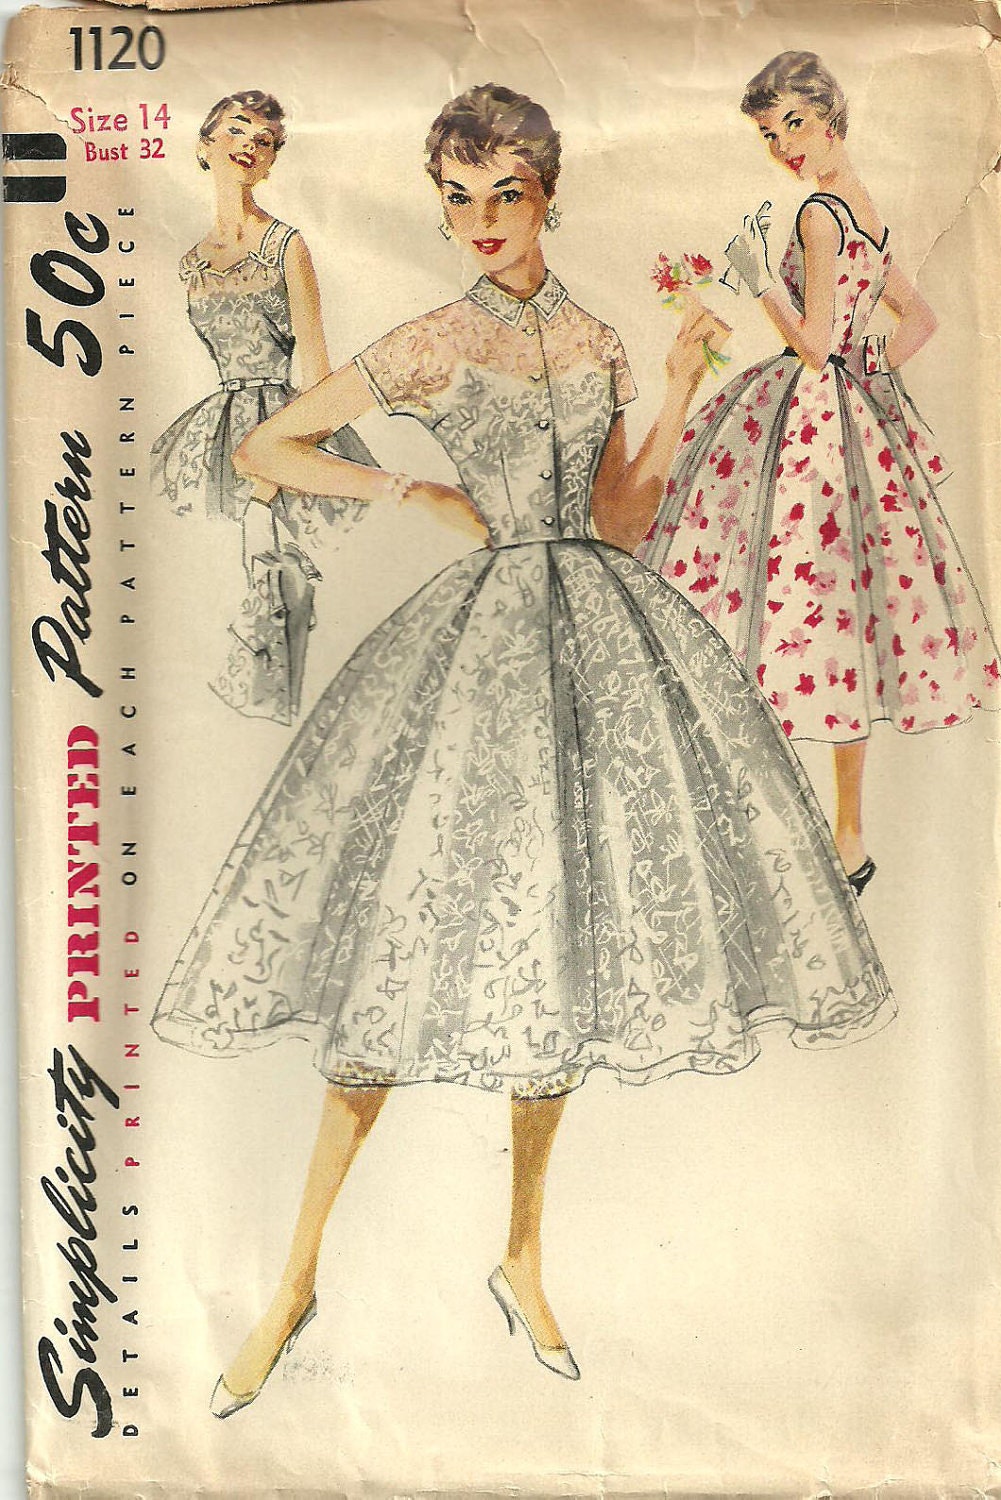 Vintage Fifties Sewing Pattern from Simplicity 1120 Dress Size